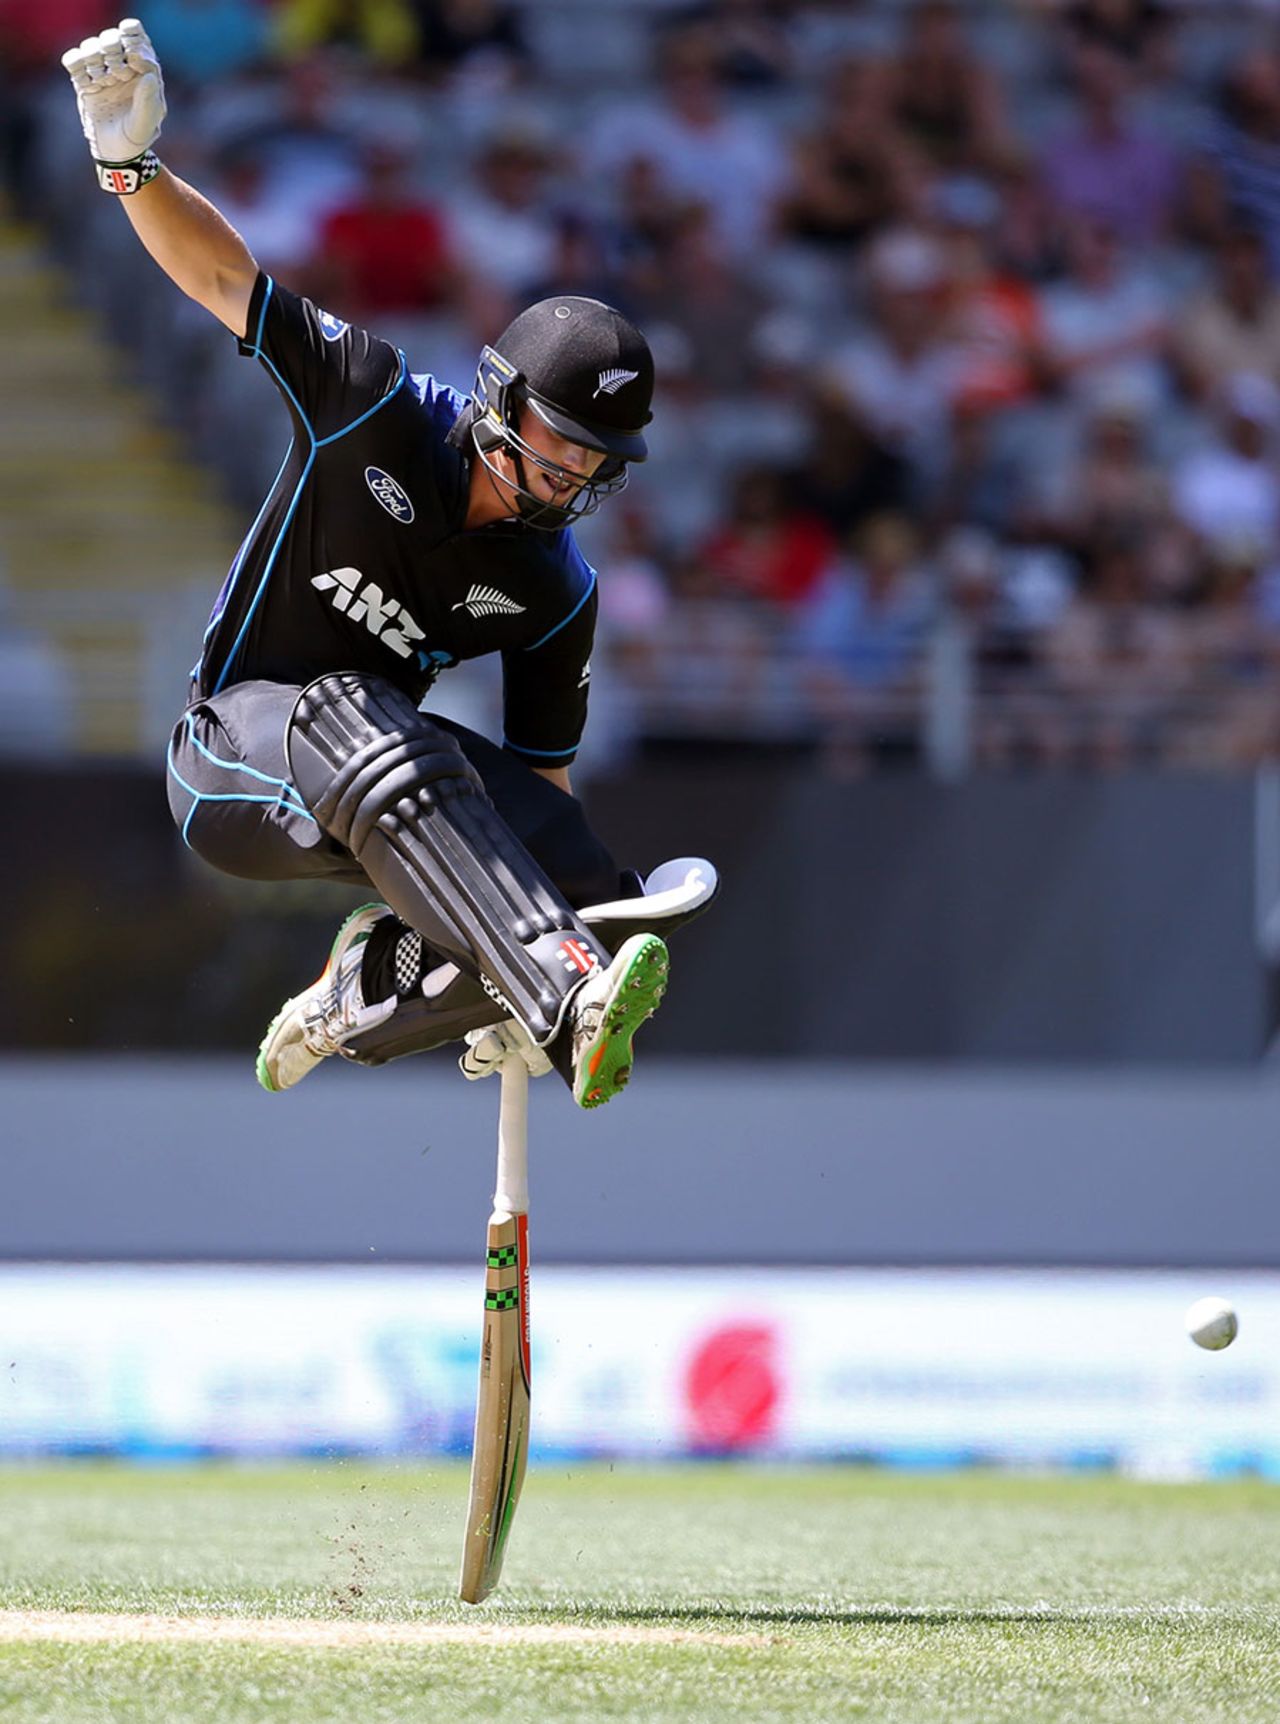 Henry Nicholls jumps while completing a run, New Zealand v Australia, 1st ODI, Auckland, February 3, 2016